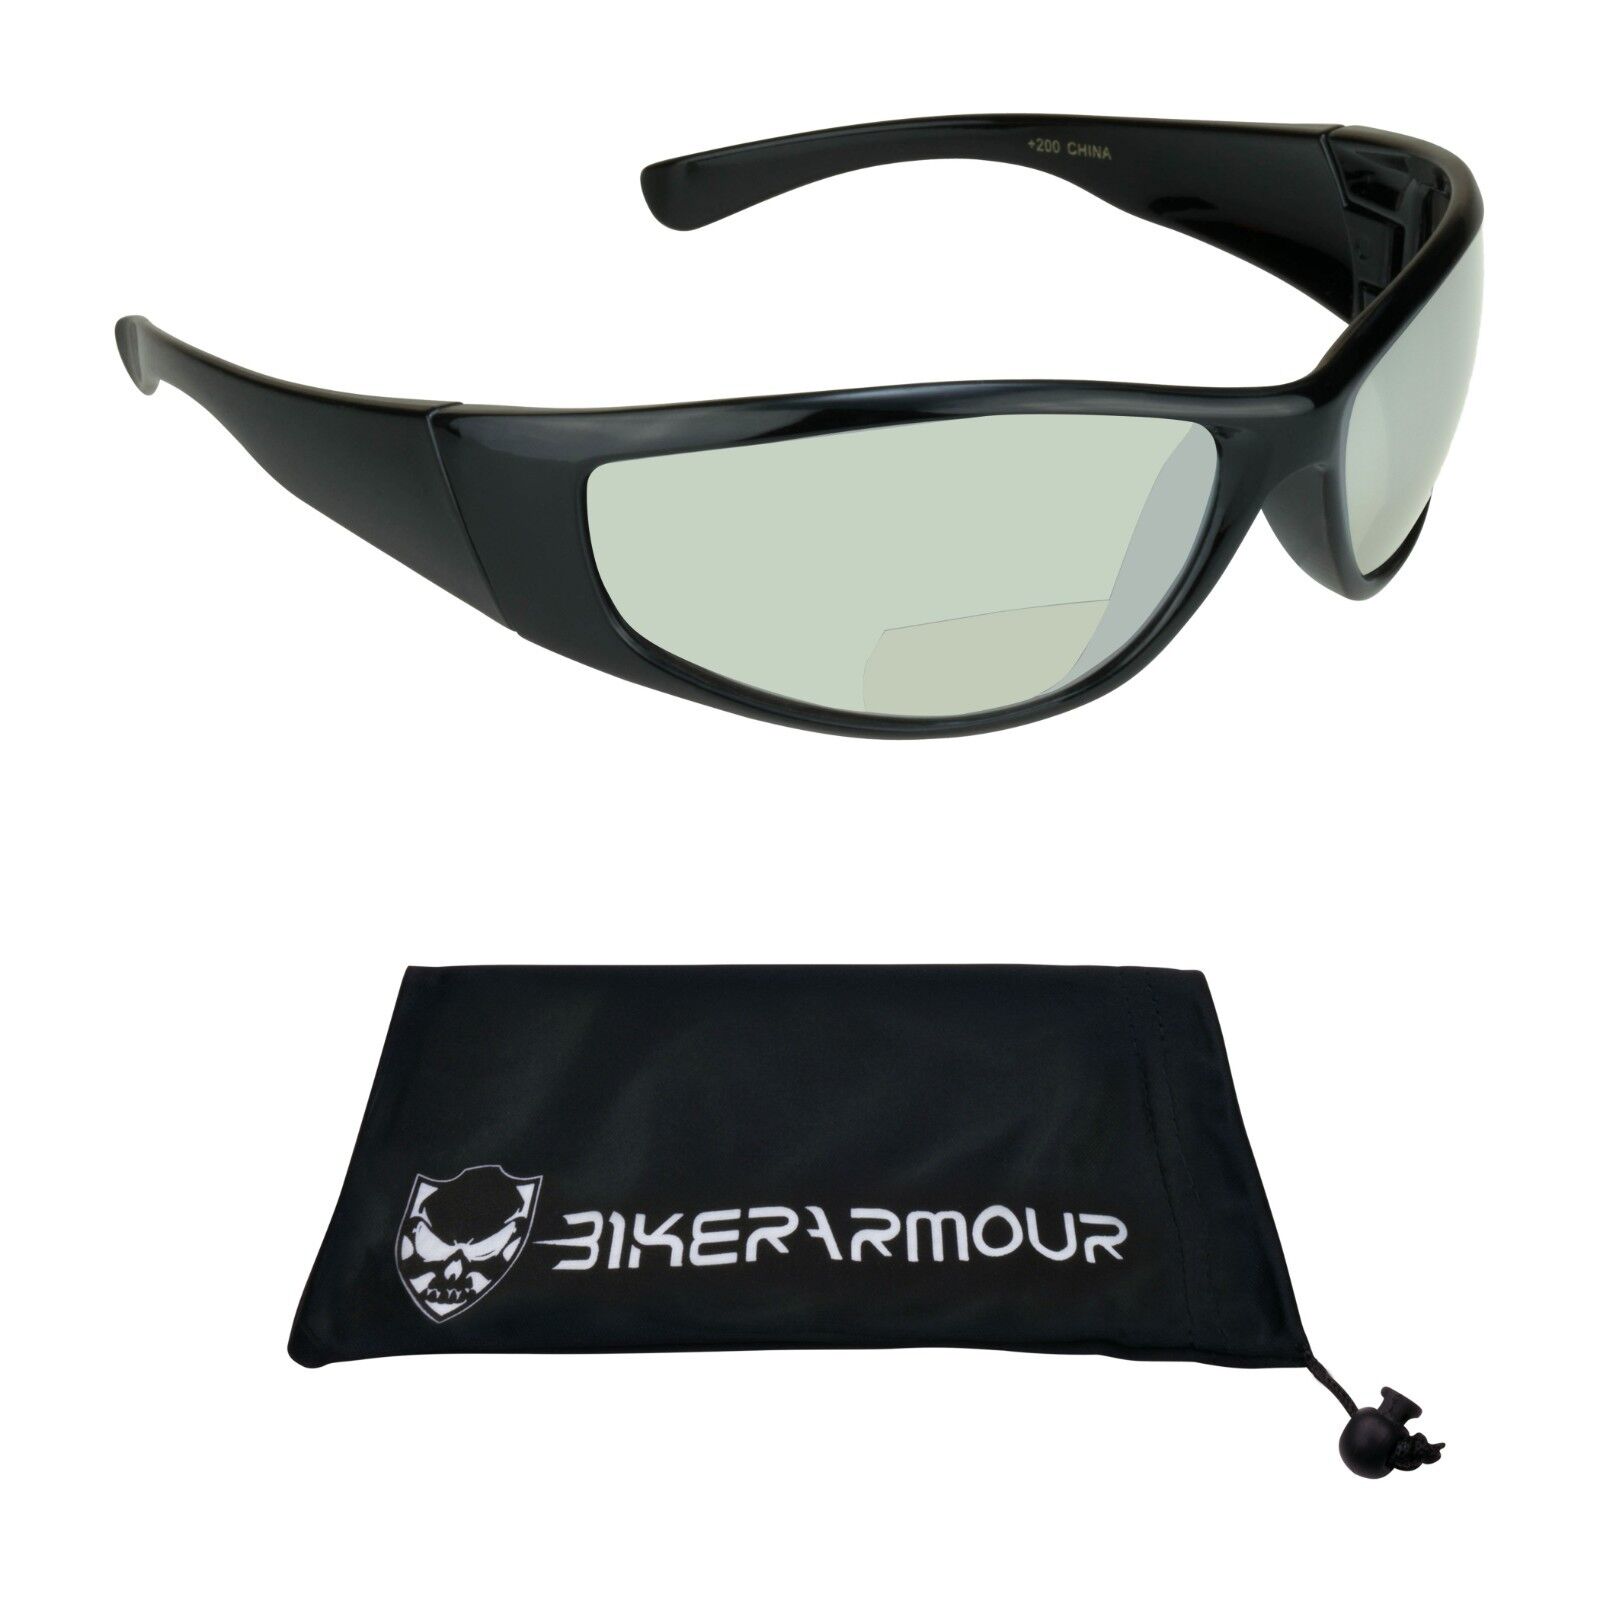 Wrap Bifocal Reading Sunglasses for Motorcycle Driving  +1.00 +1.50 +2.00 +3.00